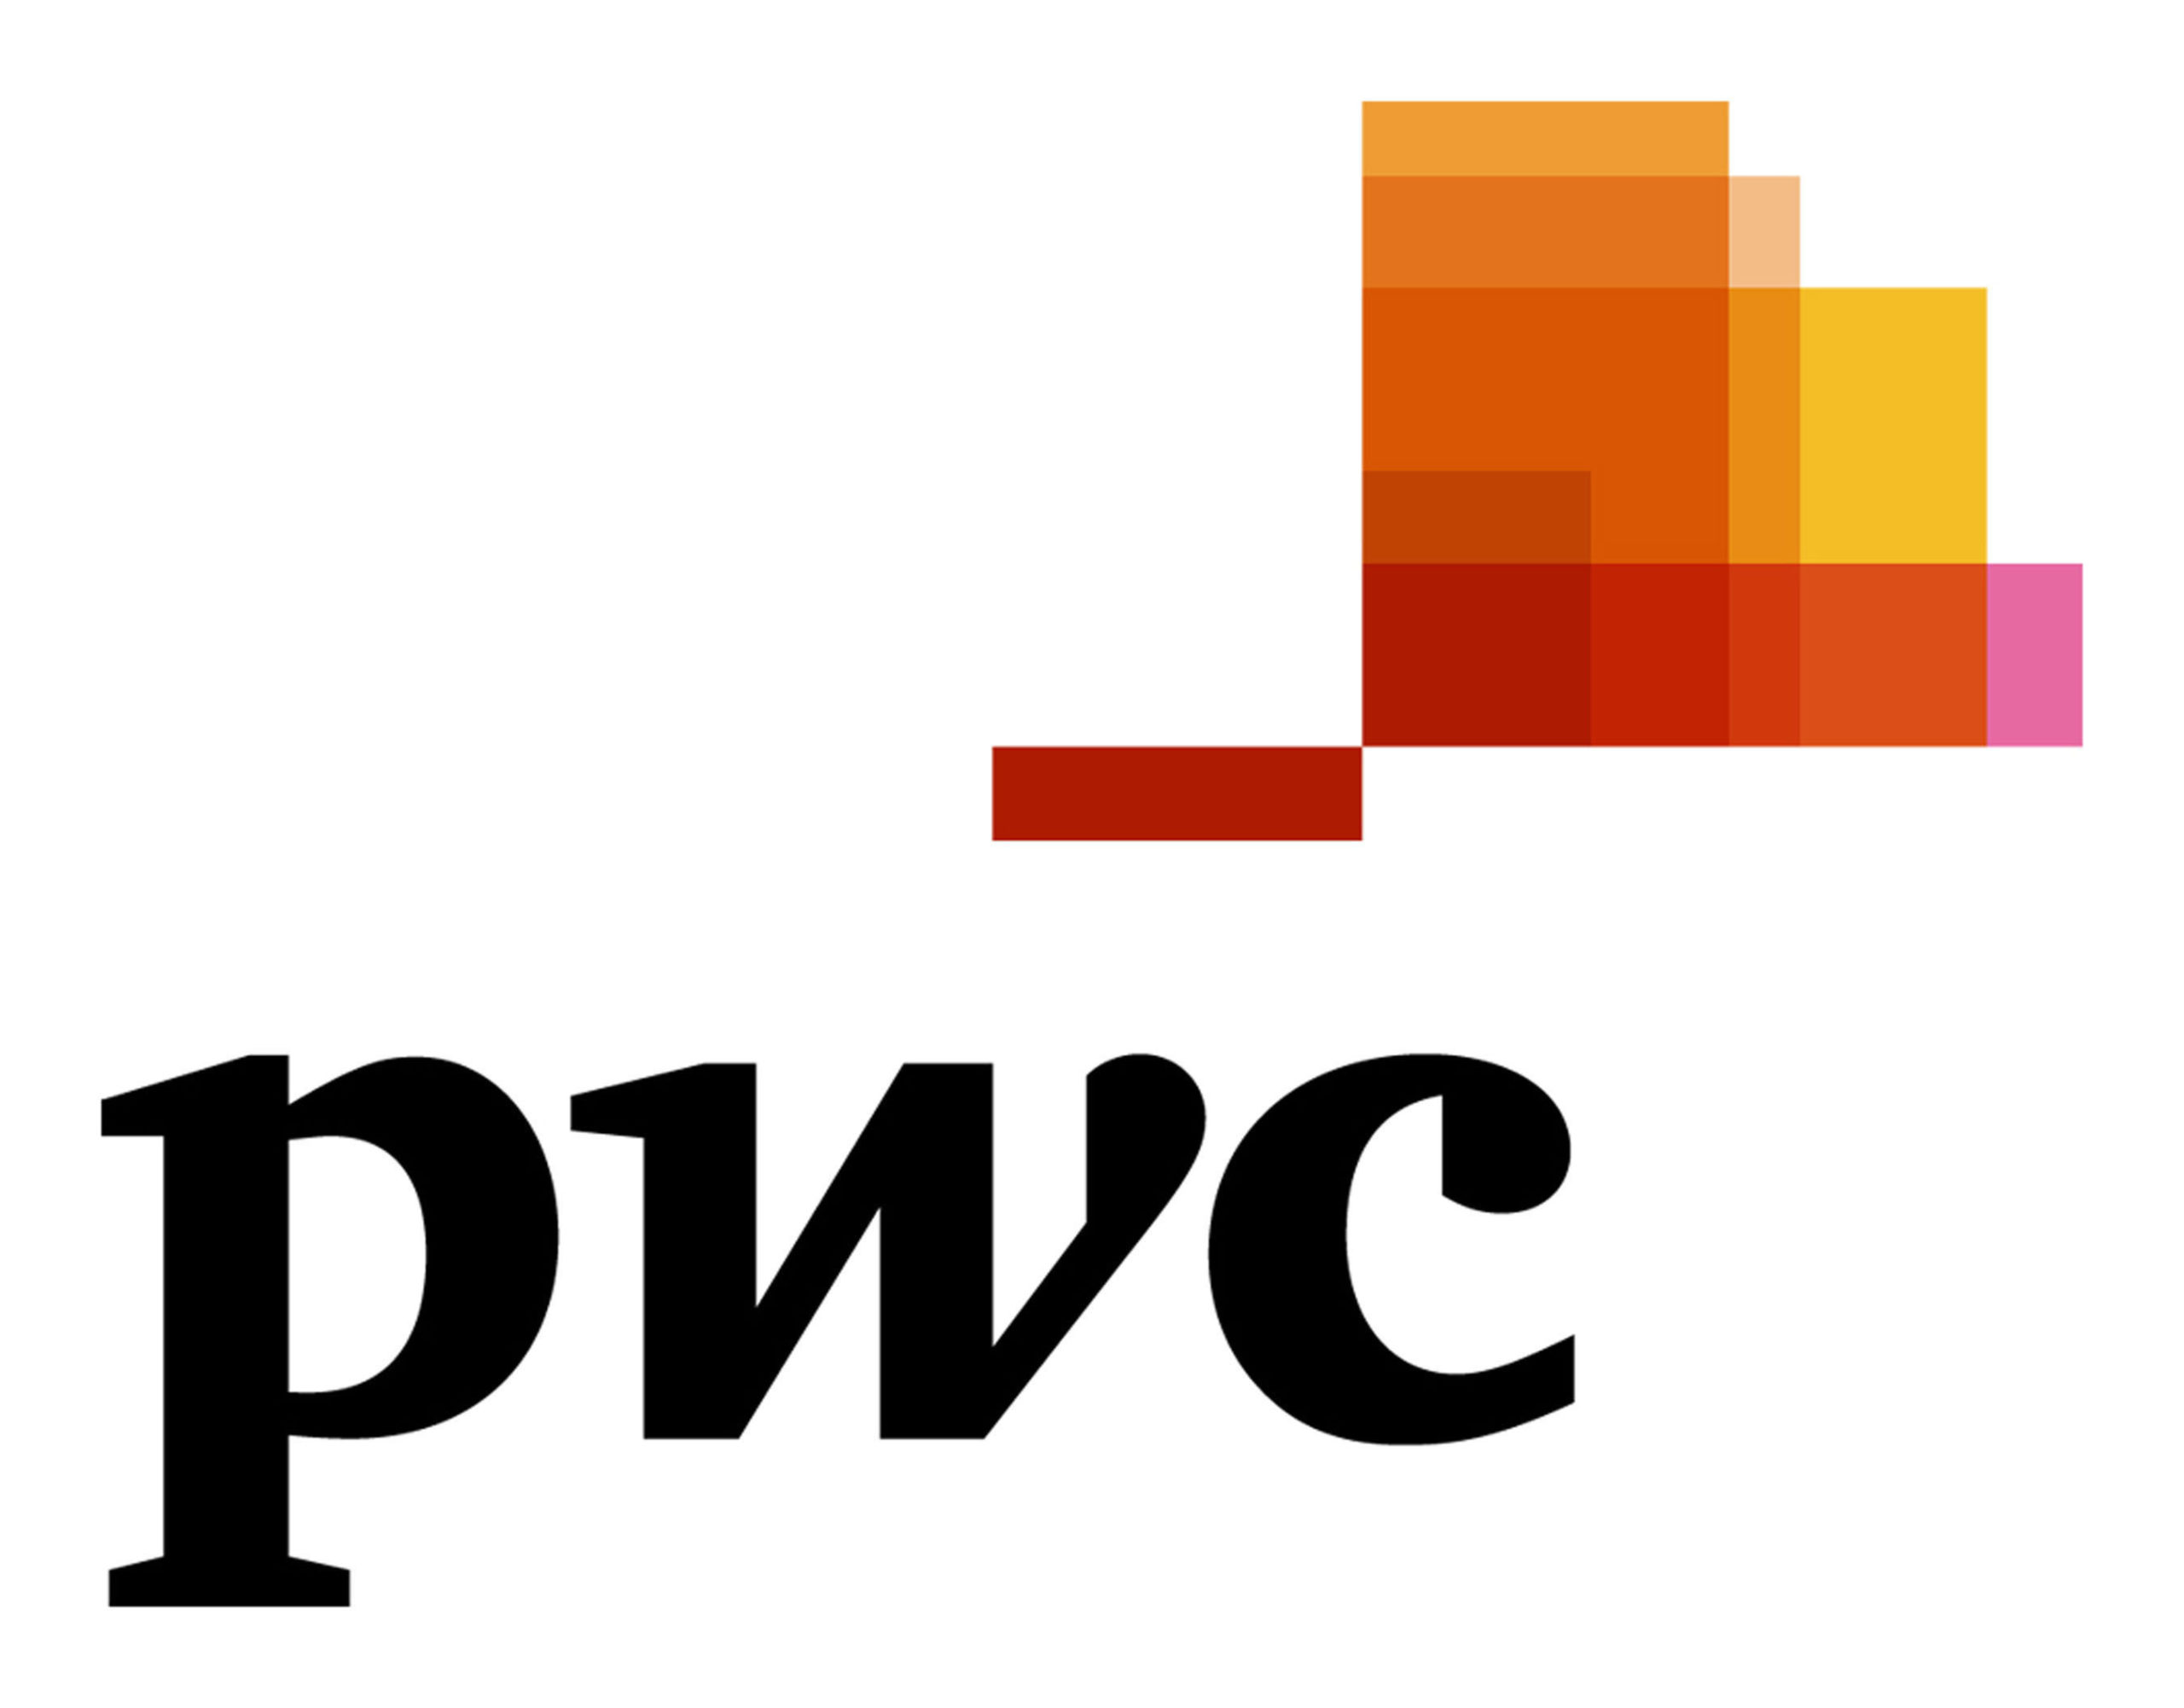 PwC To Support New Network Strategy With Six Focus Areas